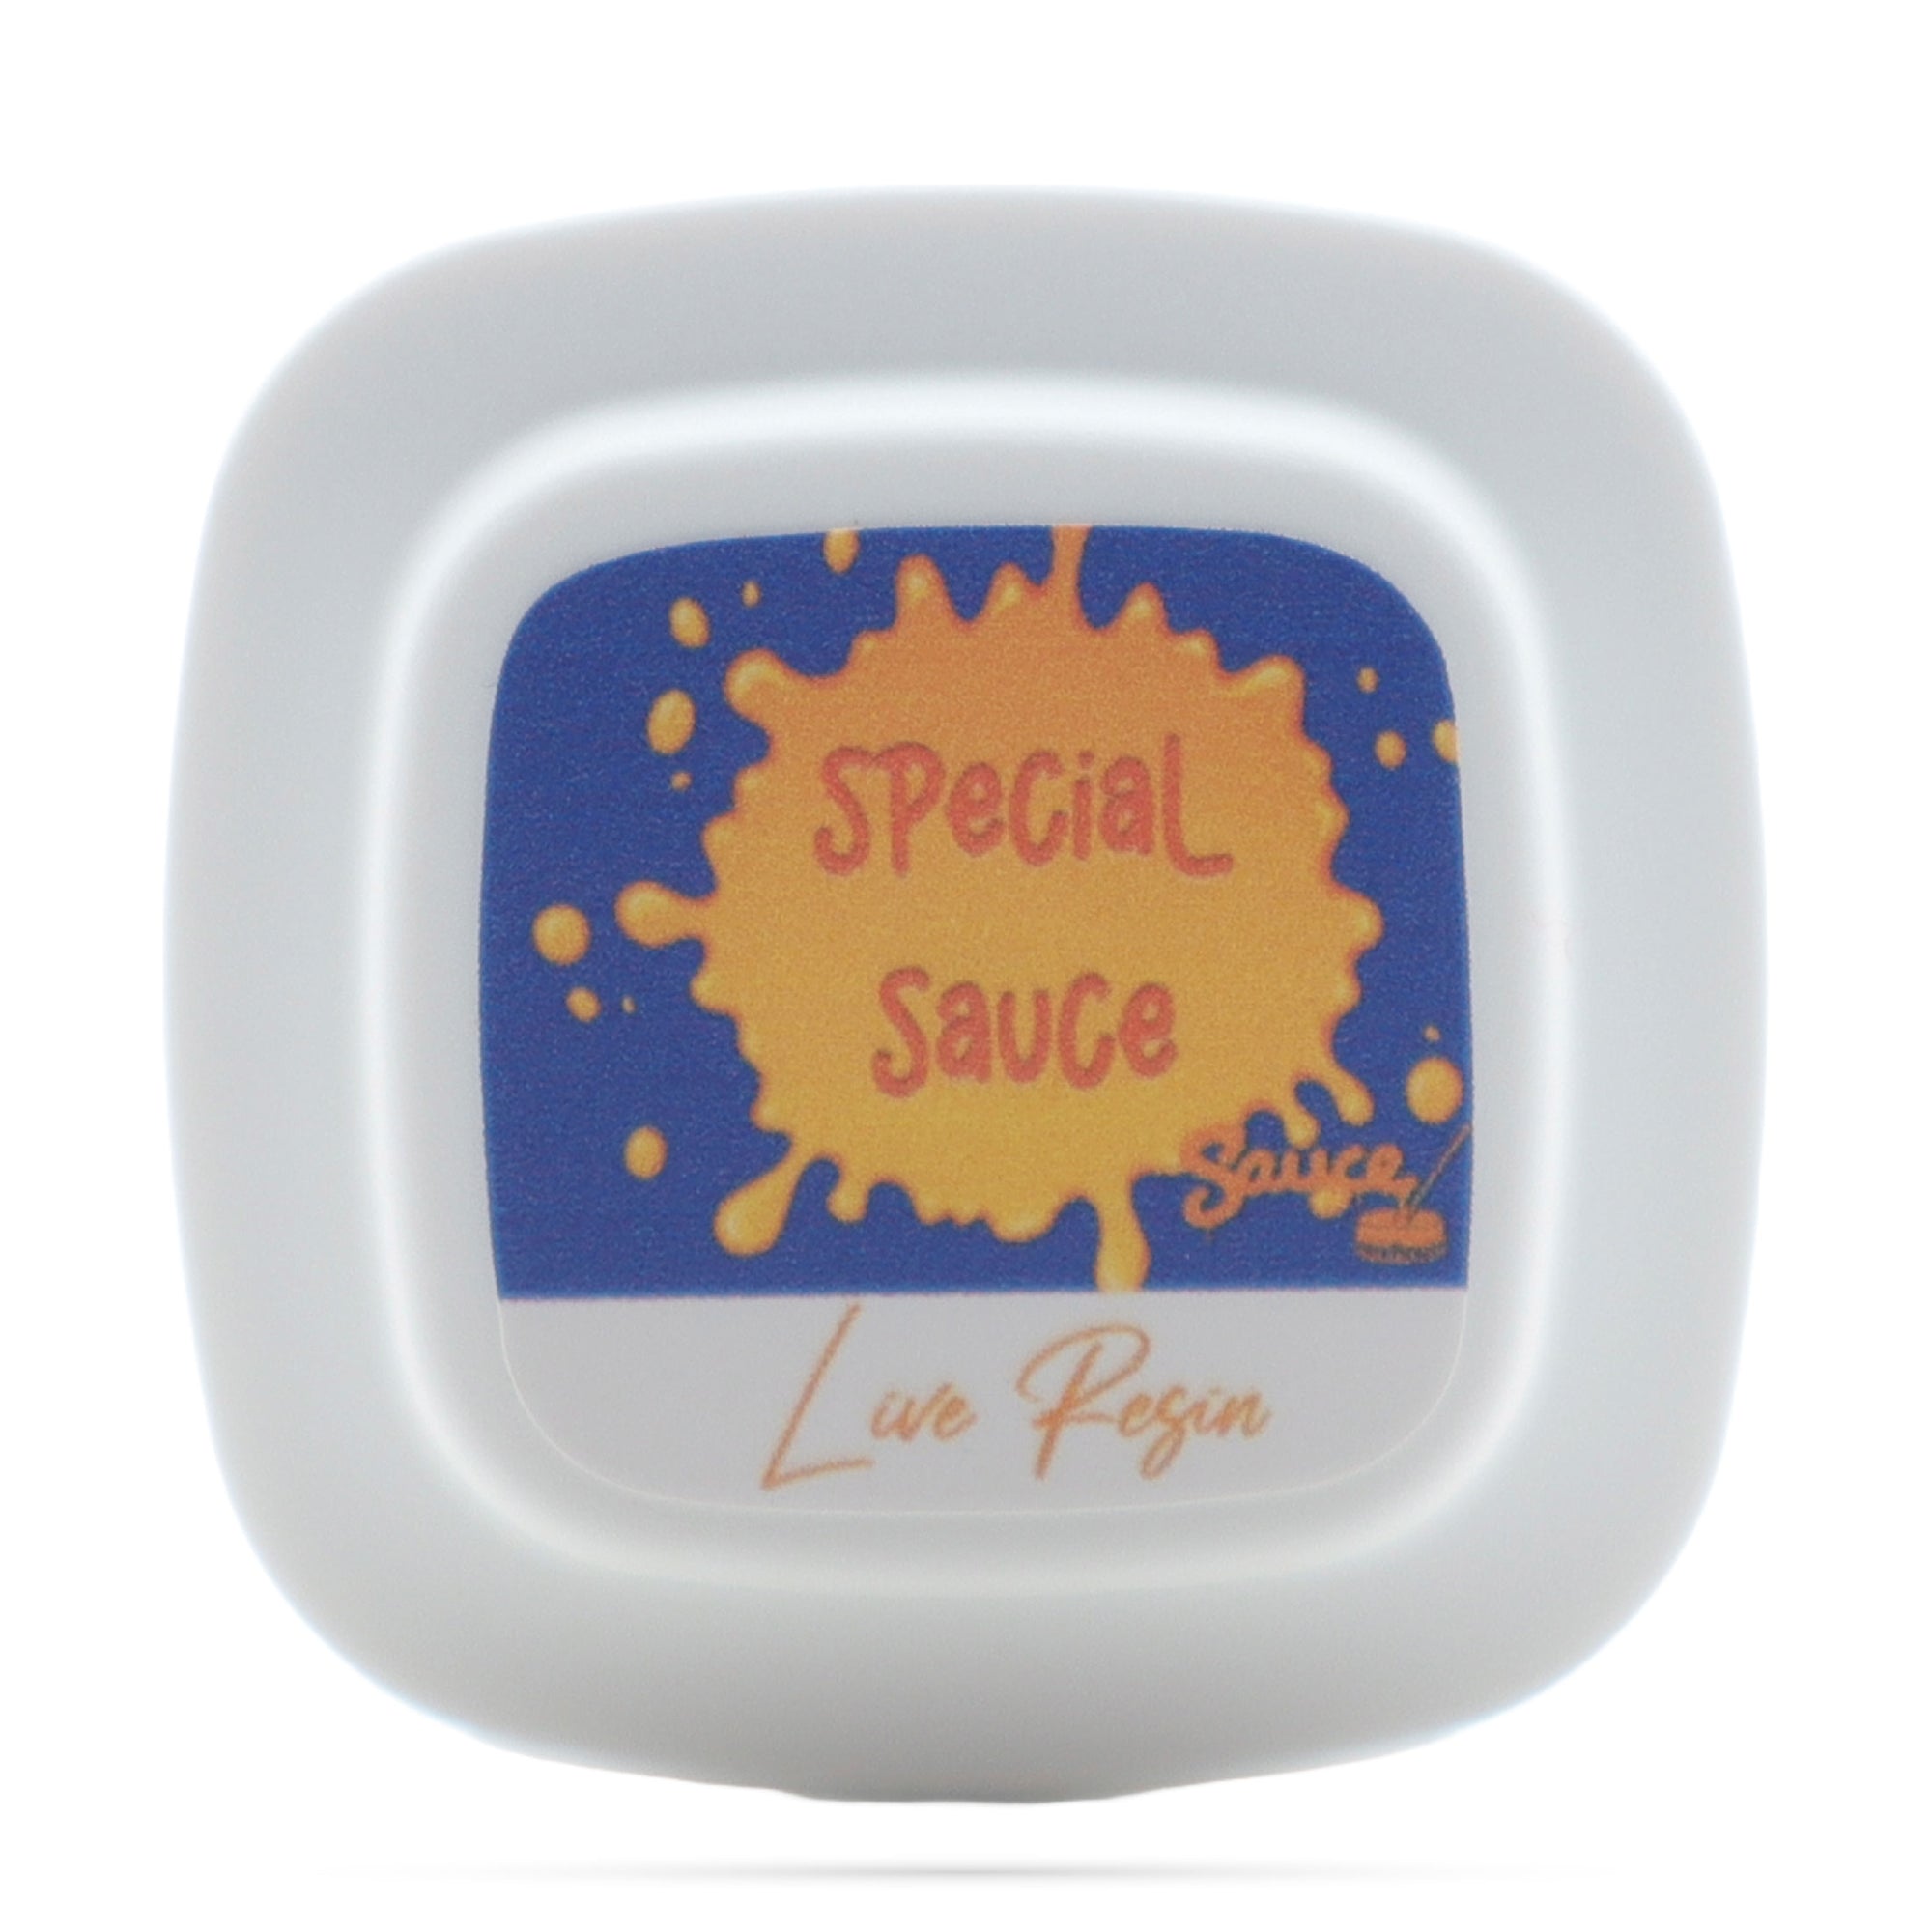 Image of Sauce Warehouse Special Sauce CBD Live Resin lid label.